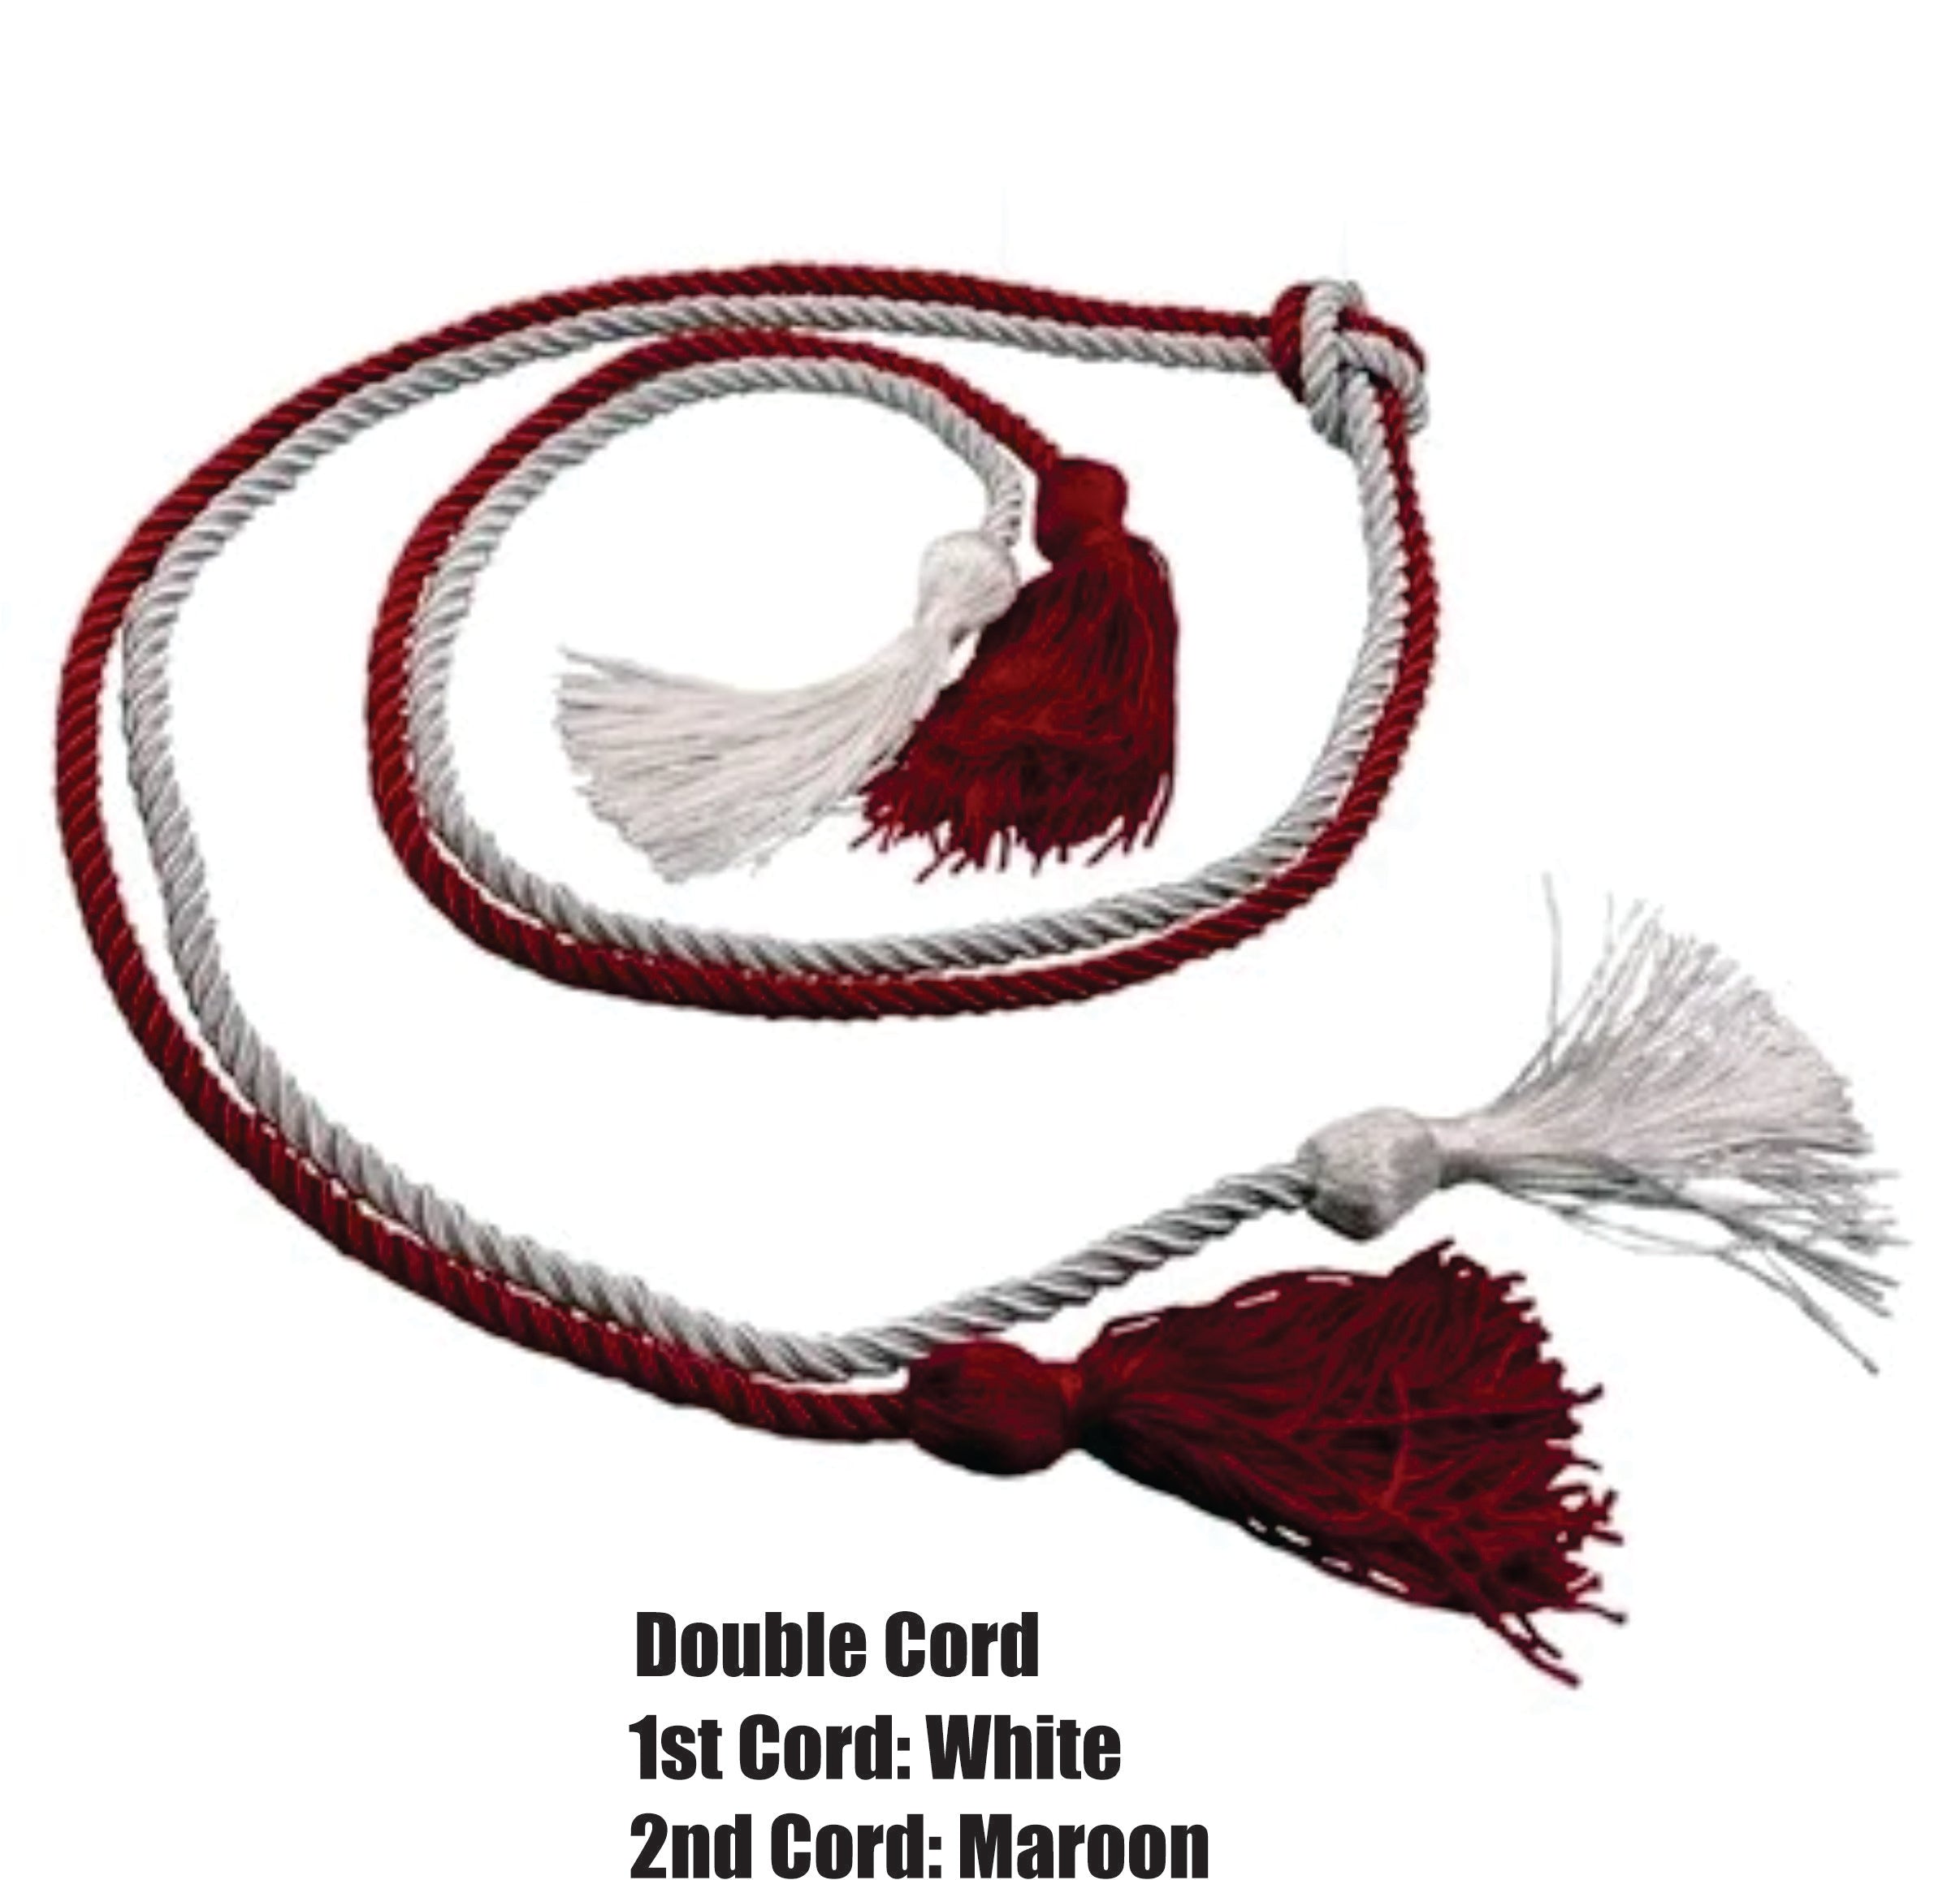 Red and White Tassels from Honors Graduation